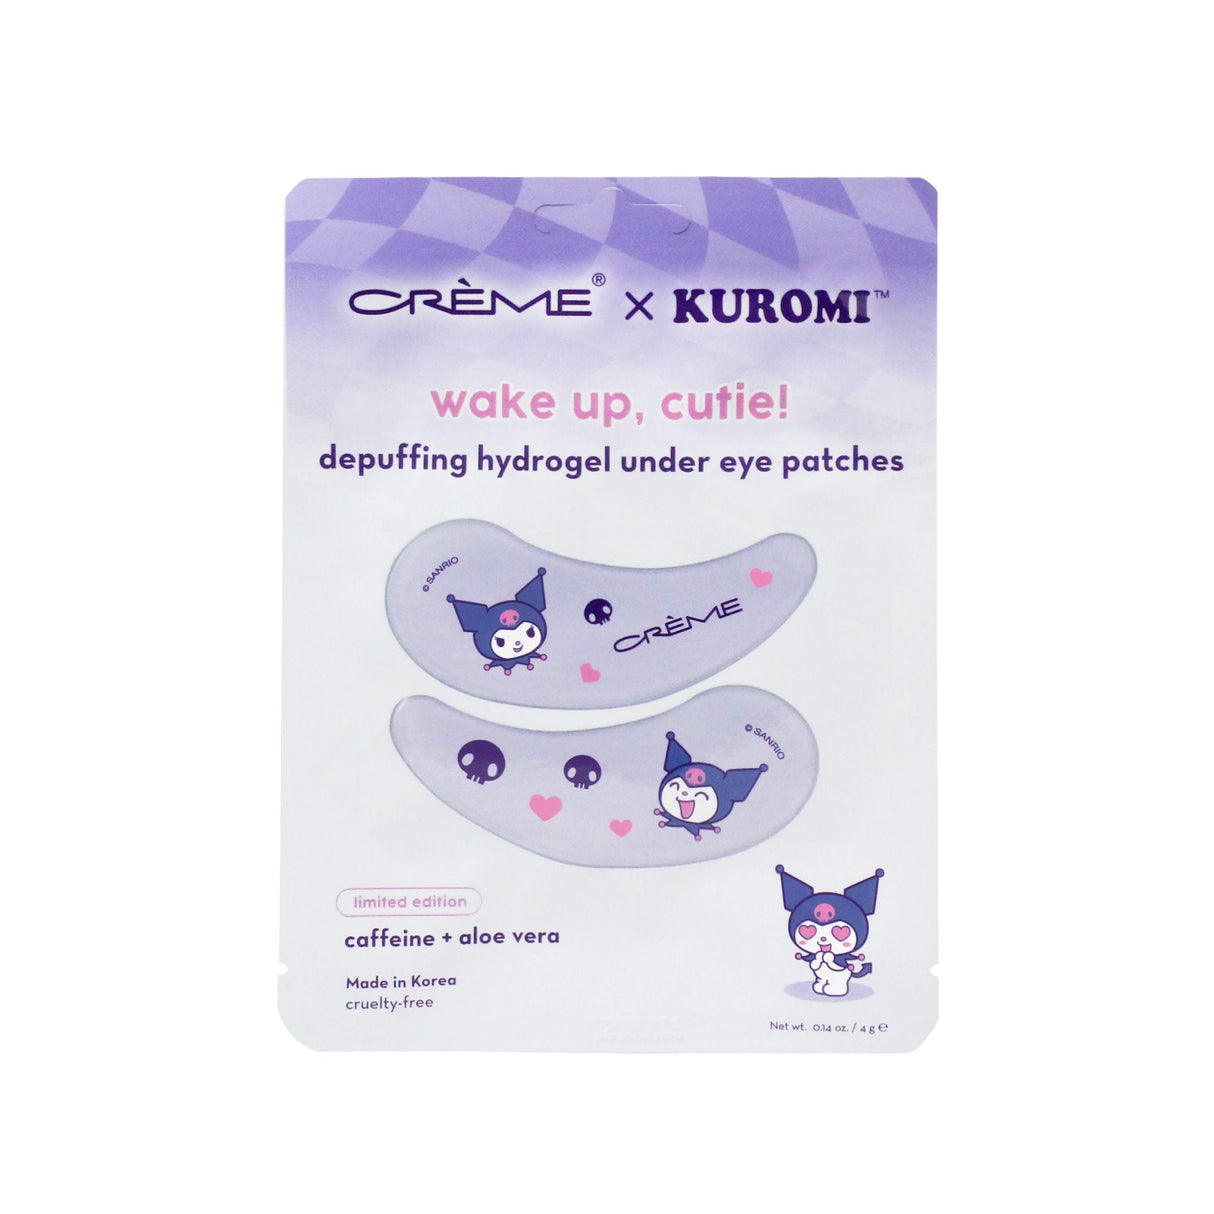 THE CREME SHOP X KUROMI - DEPUFFING HYDROGEL UNDER EYE PATCHES (6PC)